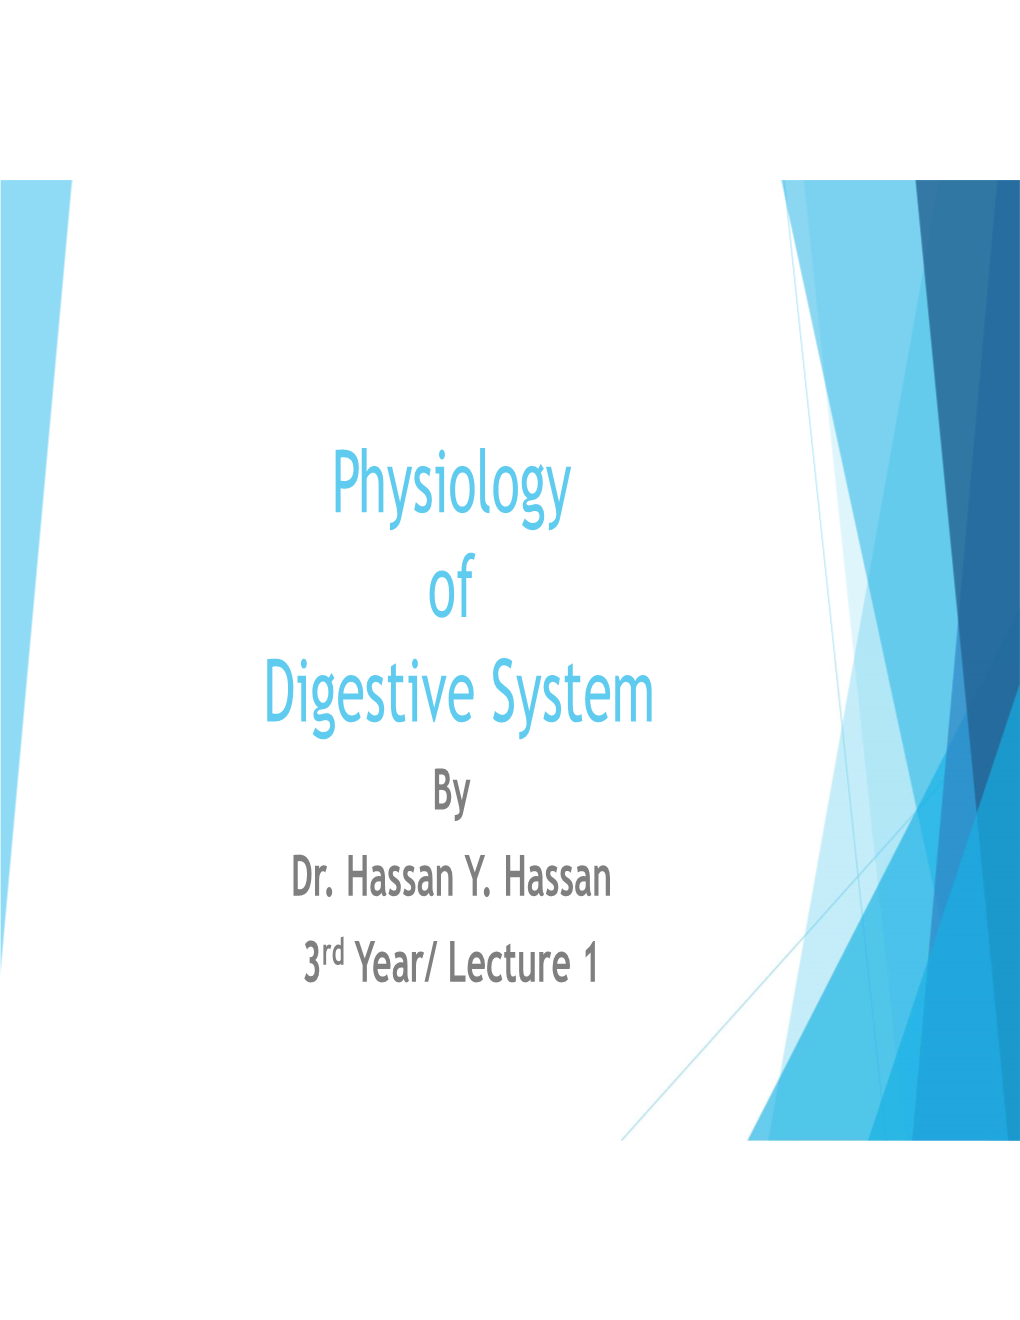 Physiology of Digestive System by Dr